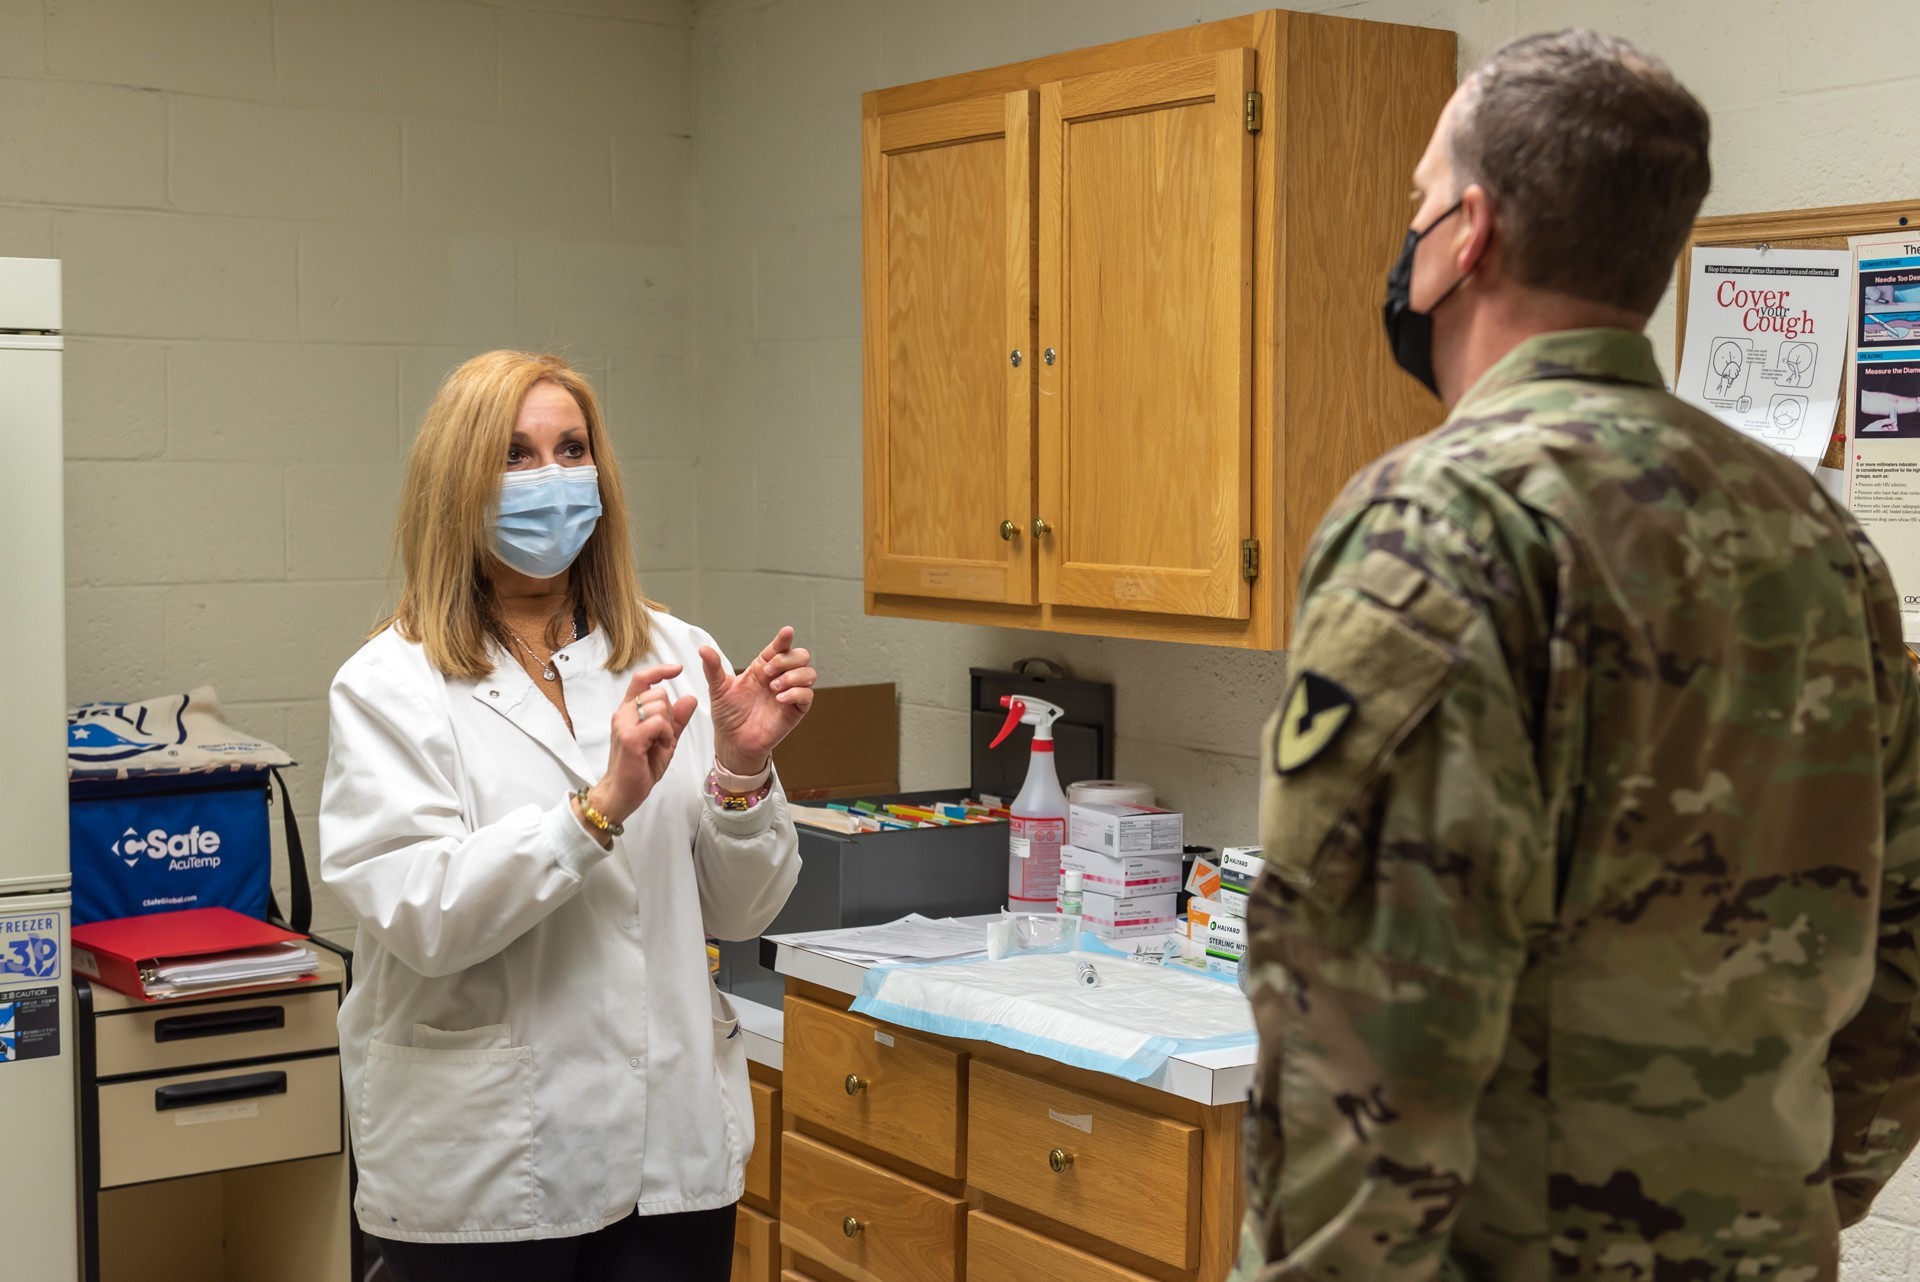 Tobyhanna Army Depot Personnel Receive Covid-19 Vaccine Article The United States Army